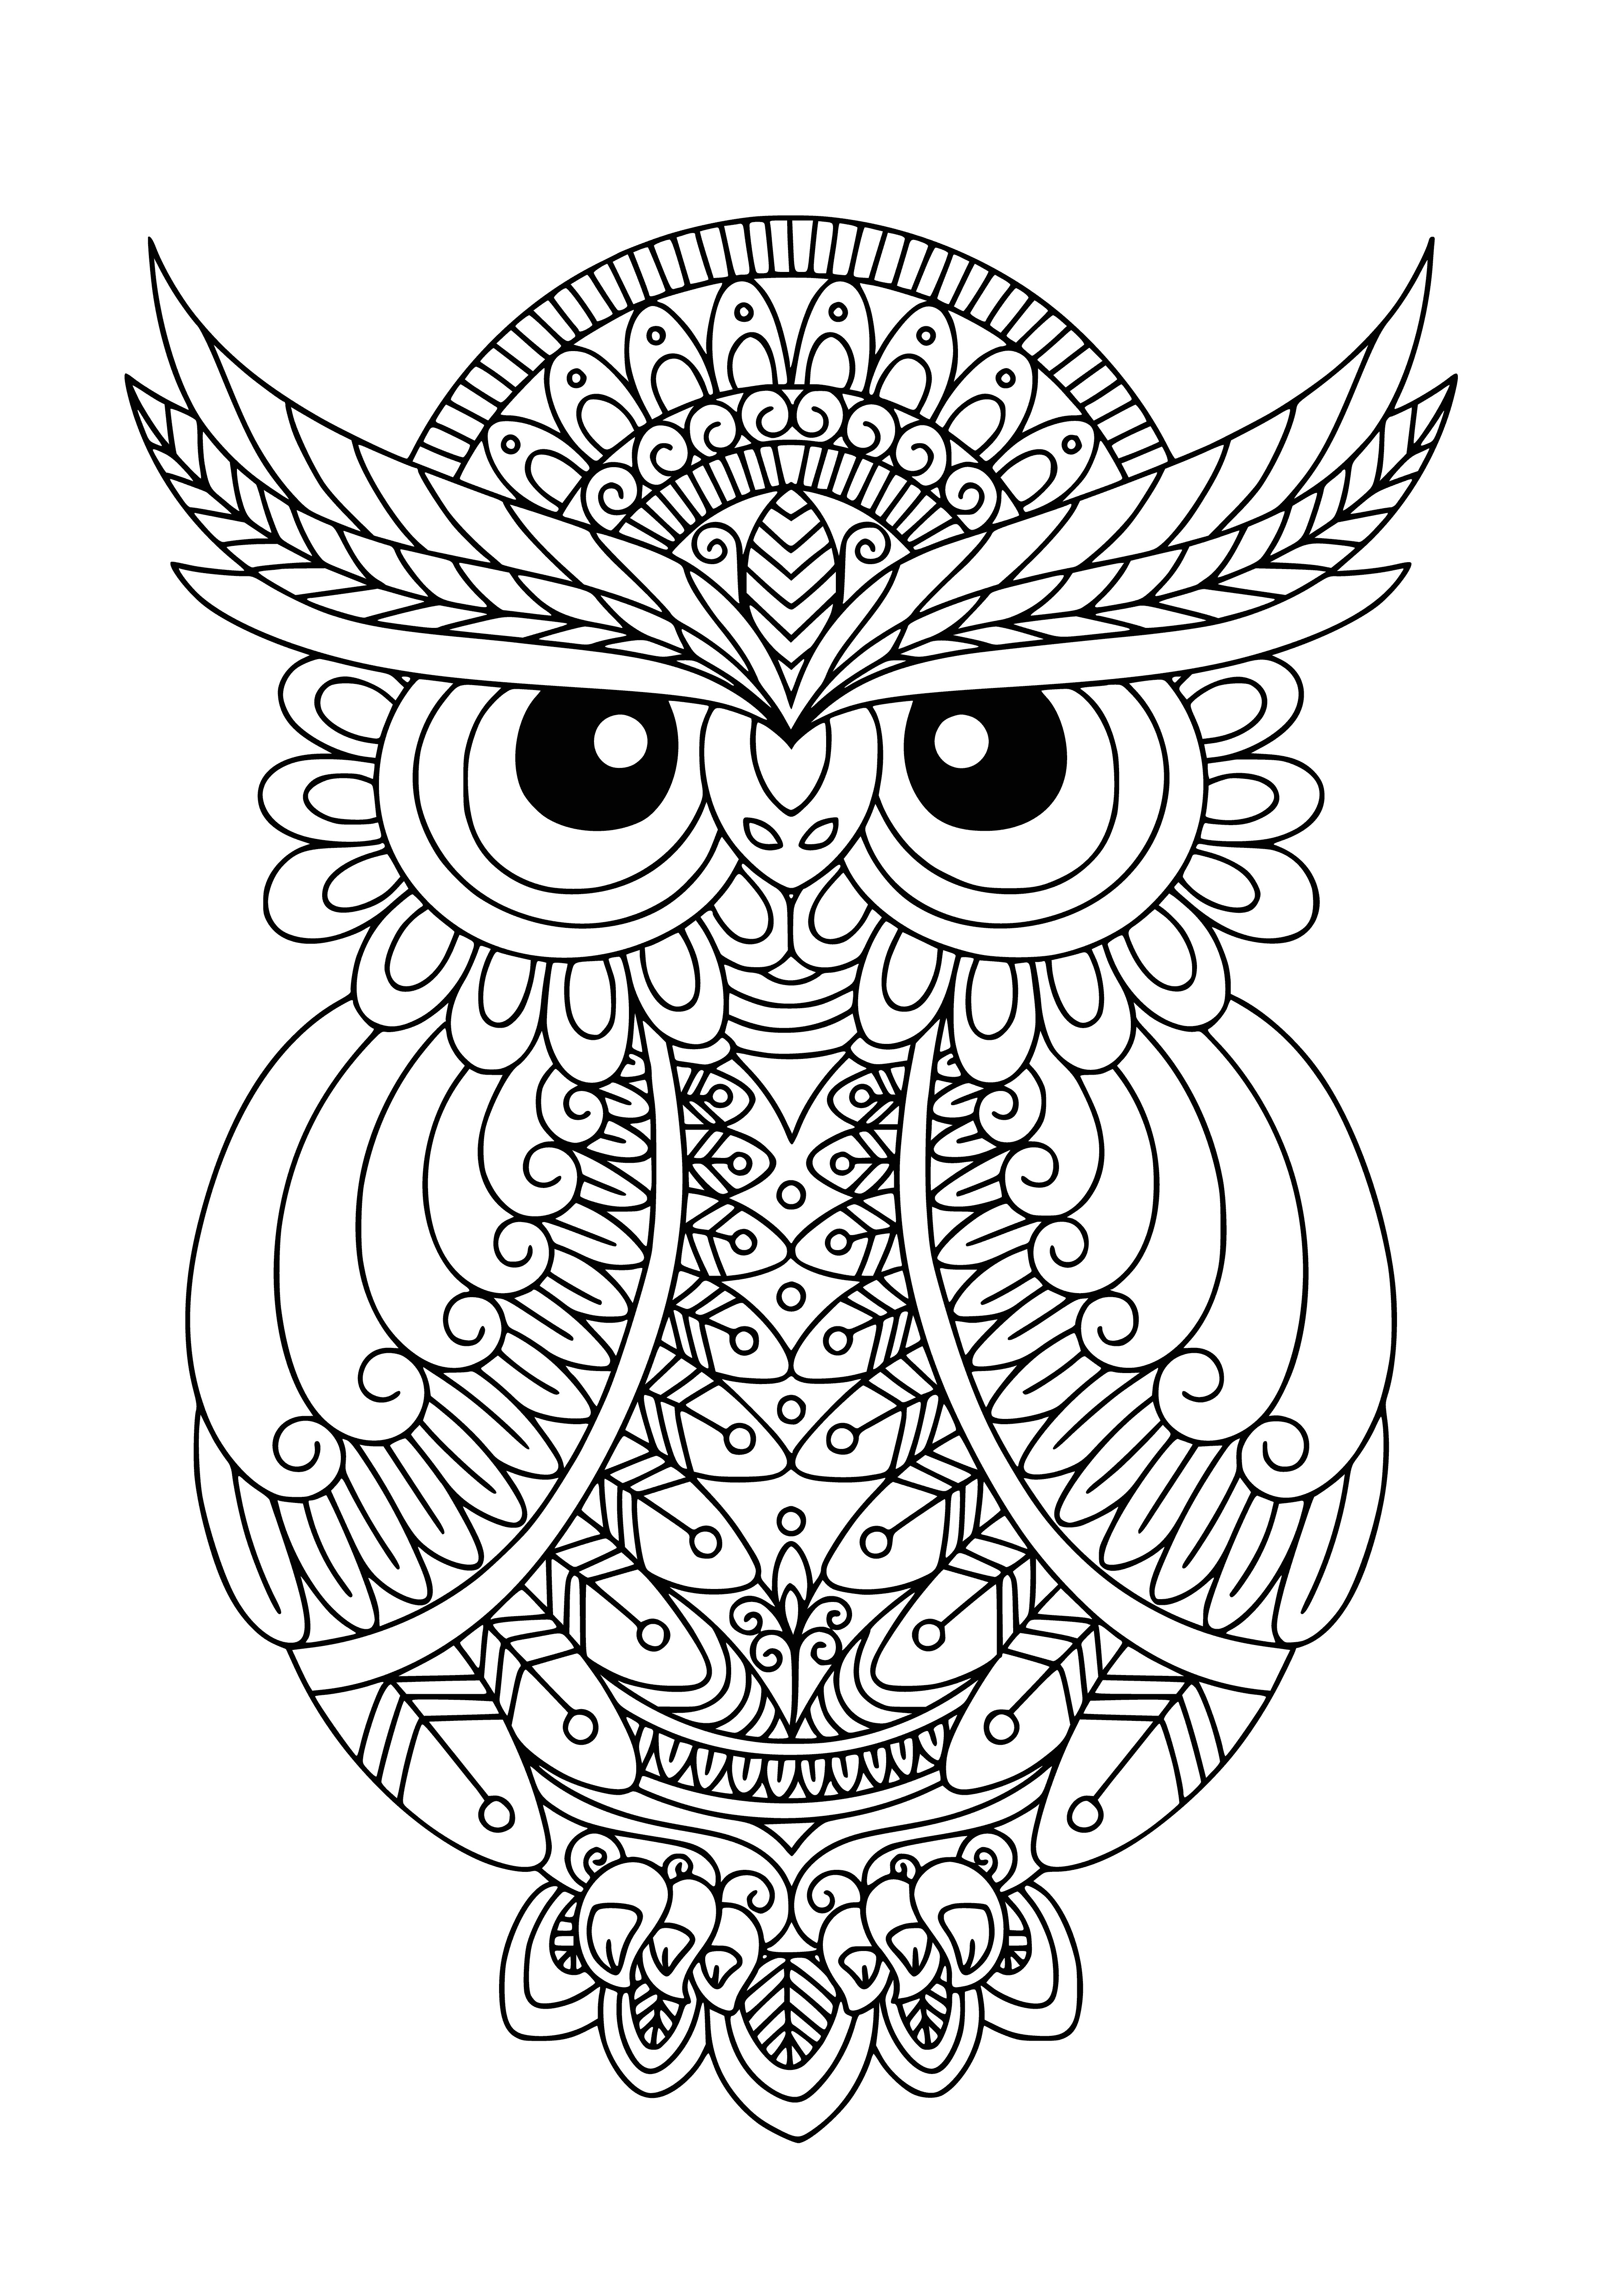 coloring page: Two owls perched on a branch surrounded by leaves & flowers create a peaceful scene.